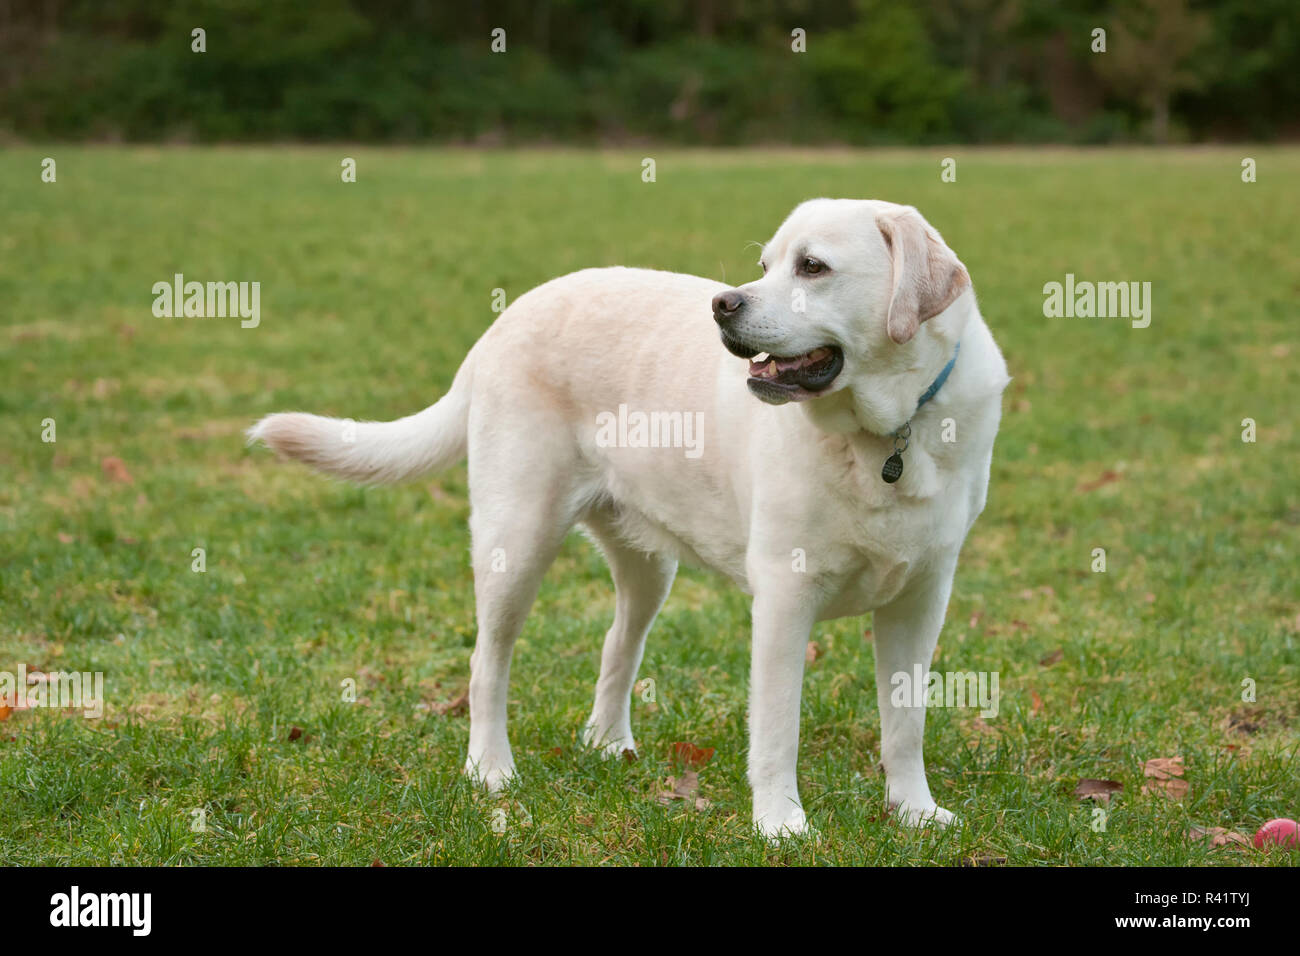 Issaquah, Washington State, USA. 6 year old English Yellow Labrador standing in a park after some active play time. (PR) Stock Photo